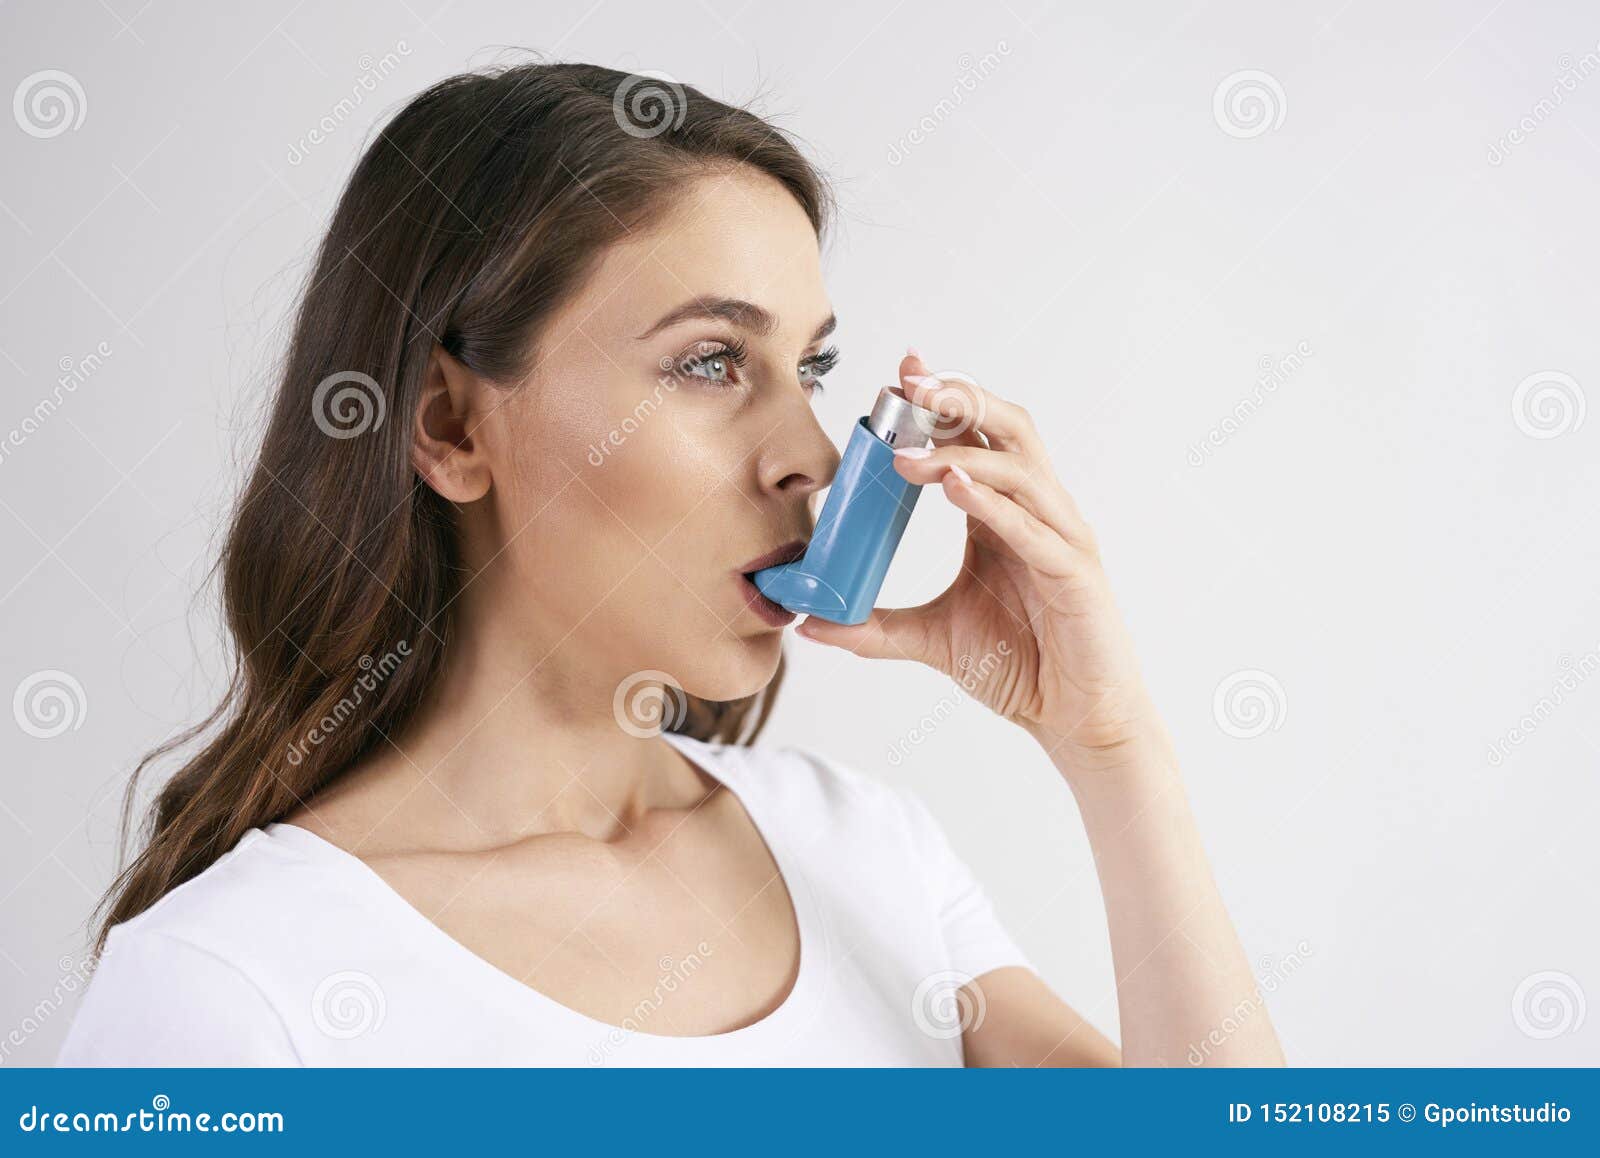 asthmatic woman using an asthma inhaler during asthma attacks